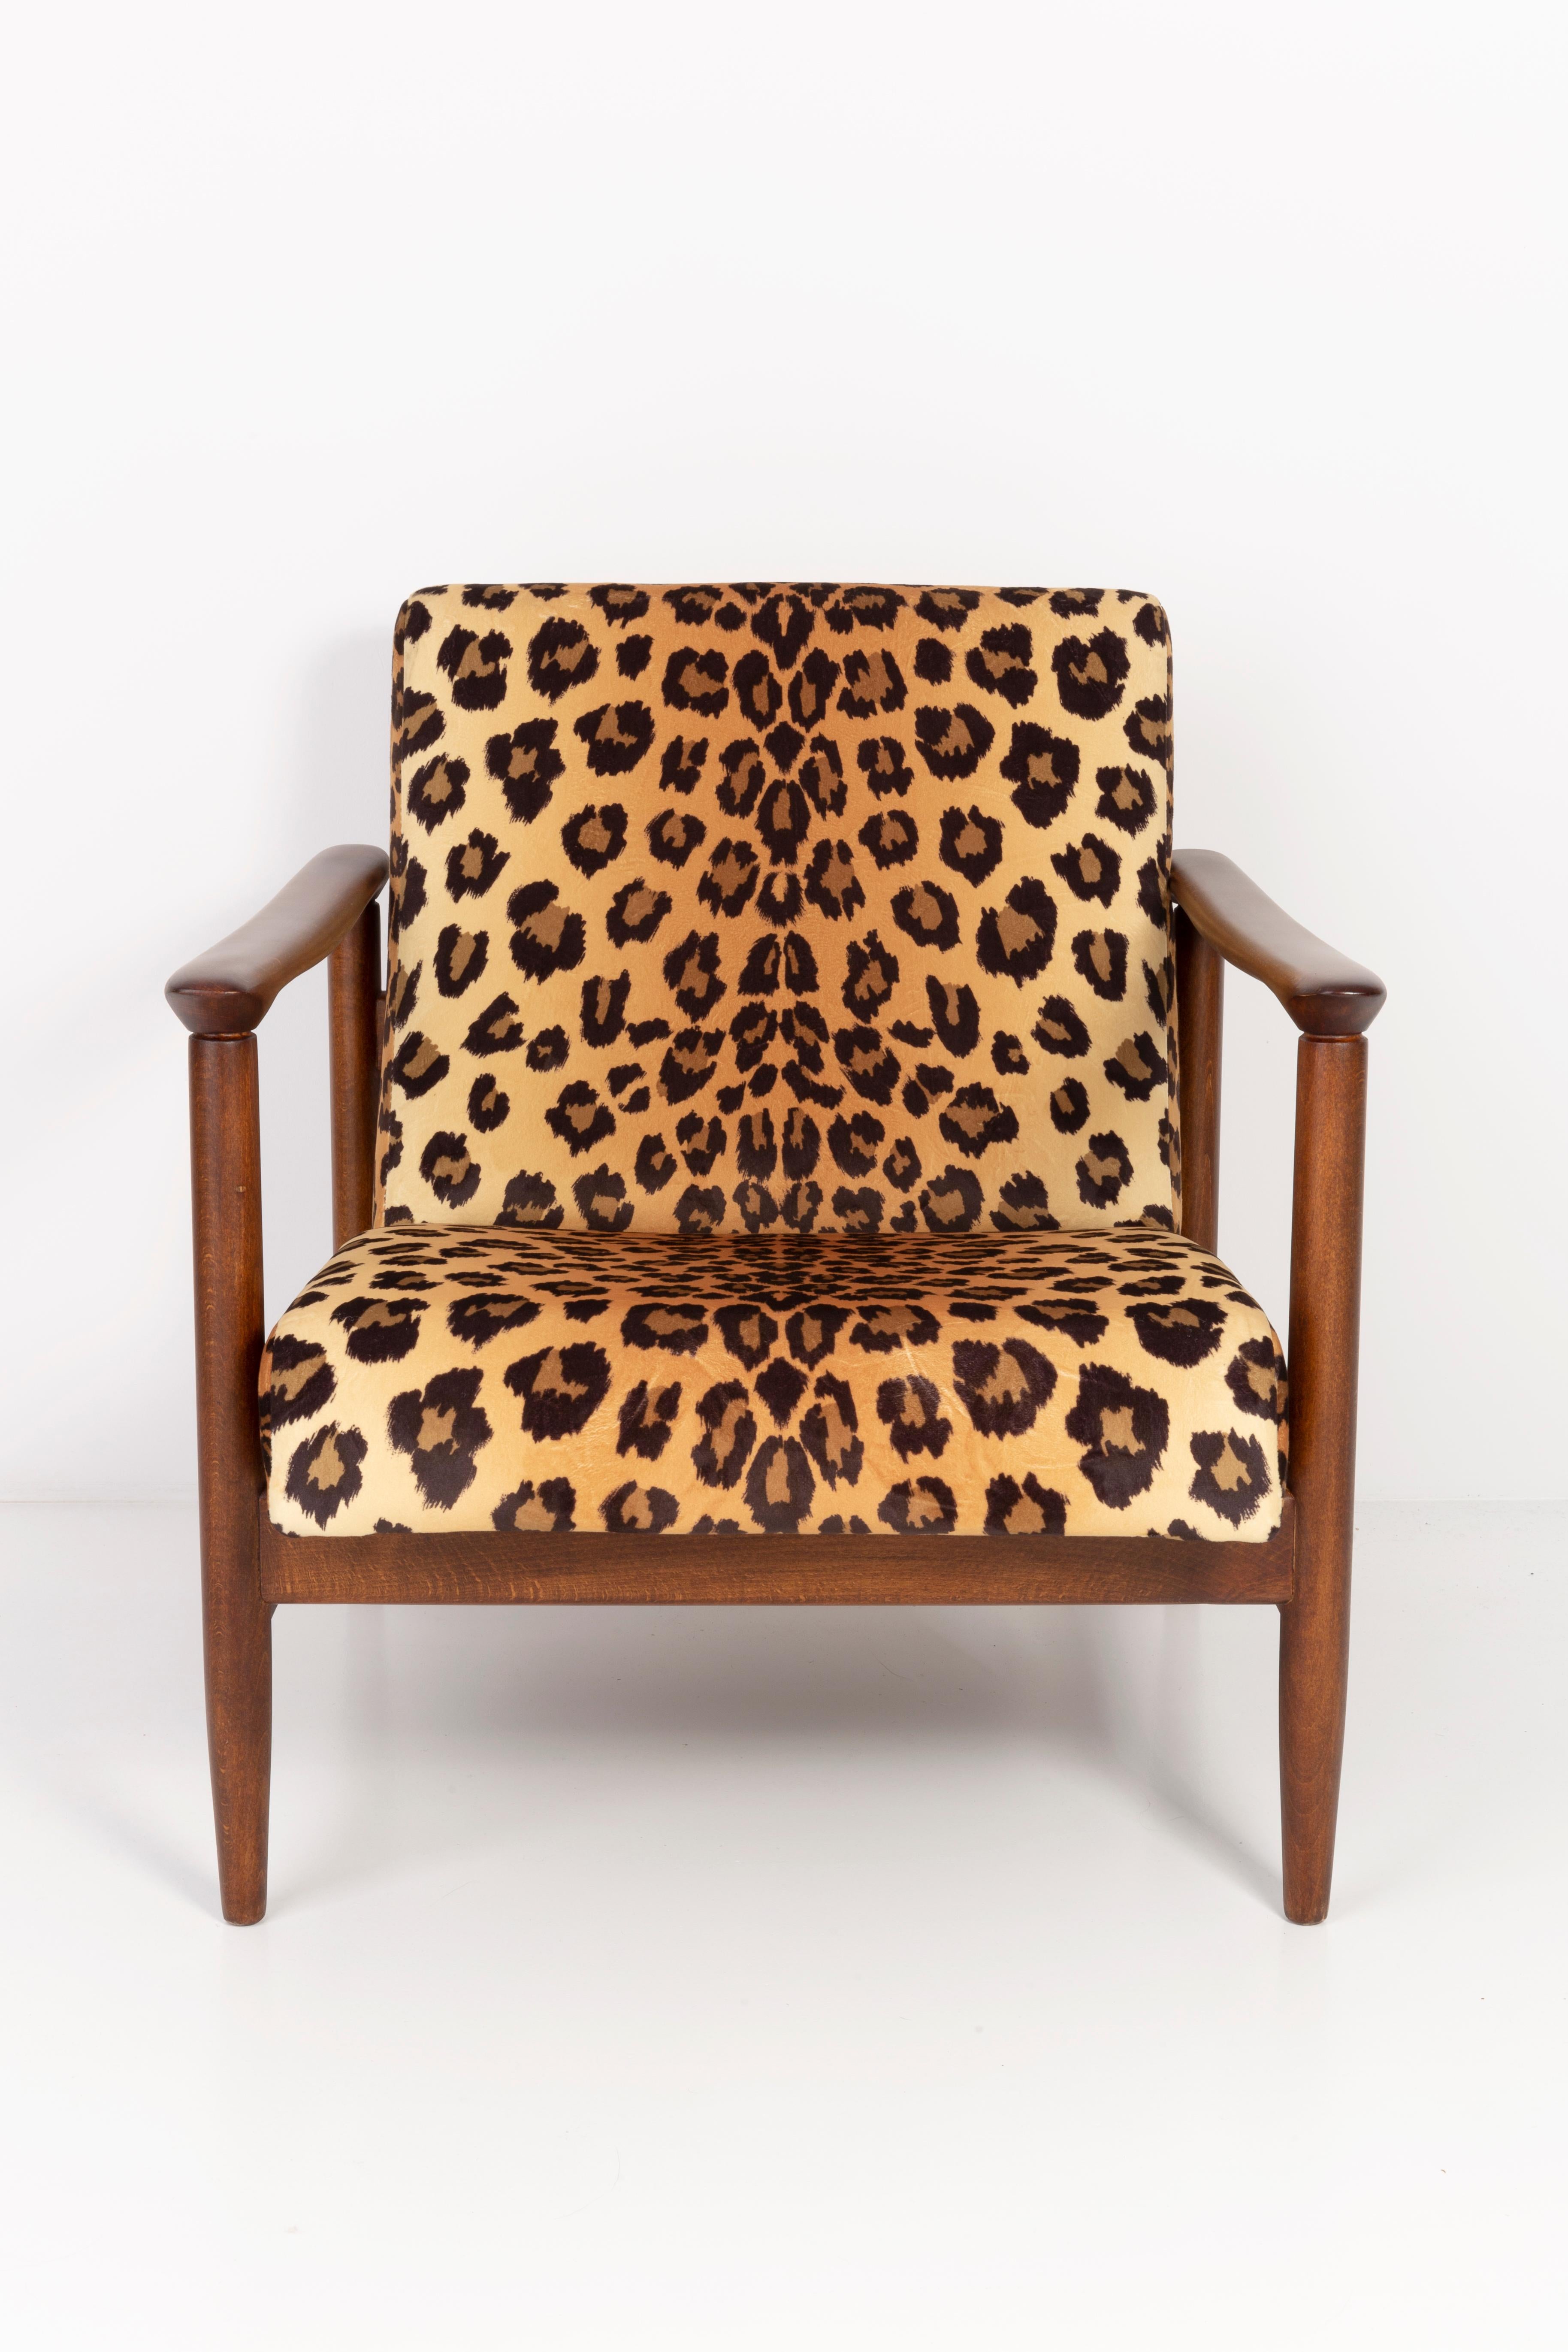 Beautiful leopard armchair GFM-142, designed by Edmund Homa, a polish architect, designer of Industrial Design and interior architecture, professor at the Academy of Fine Arts in Gdansk.

The armchair was made in the 1960s in the Gosciecinska